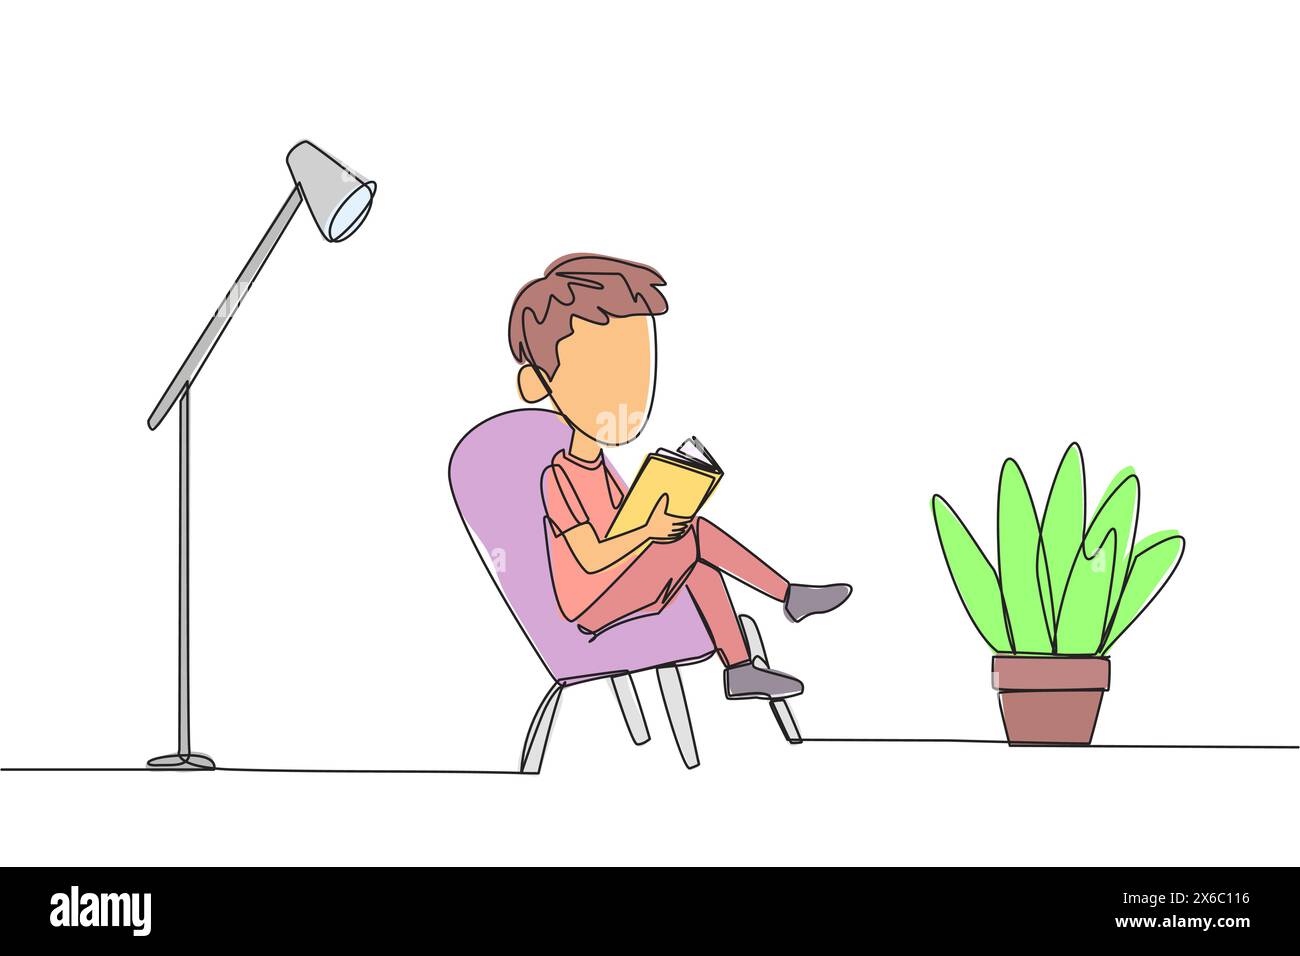 Single one line drawing smart boy sitting reading in a room with a reading lamp. Spending school holidays increasing knowledge by reading books. Love Stock Vector